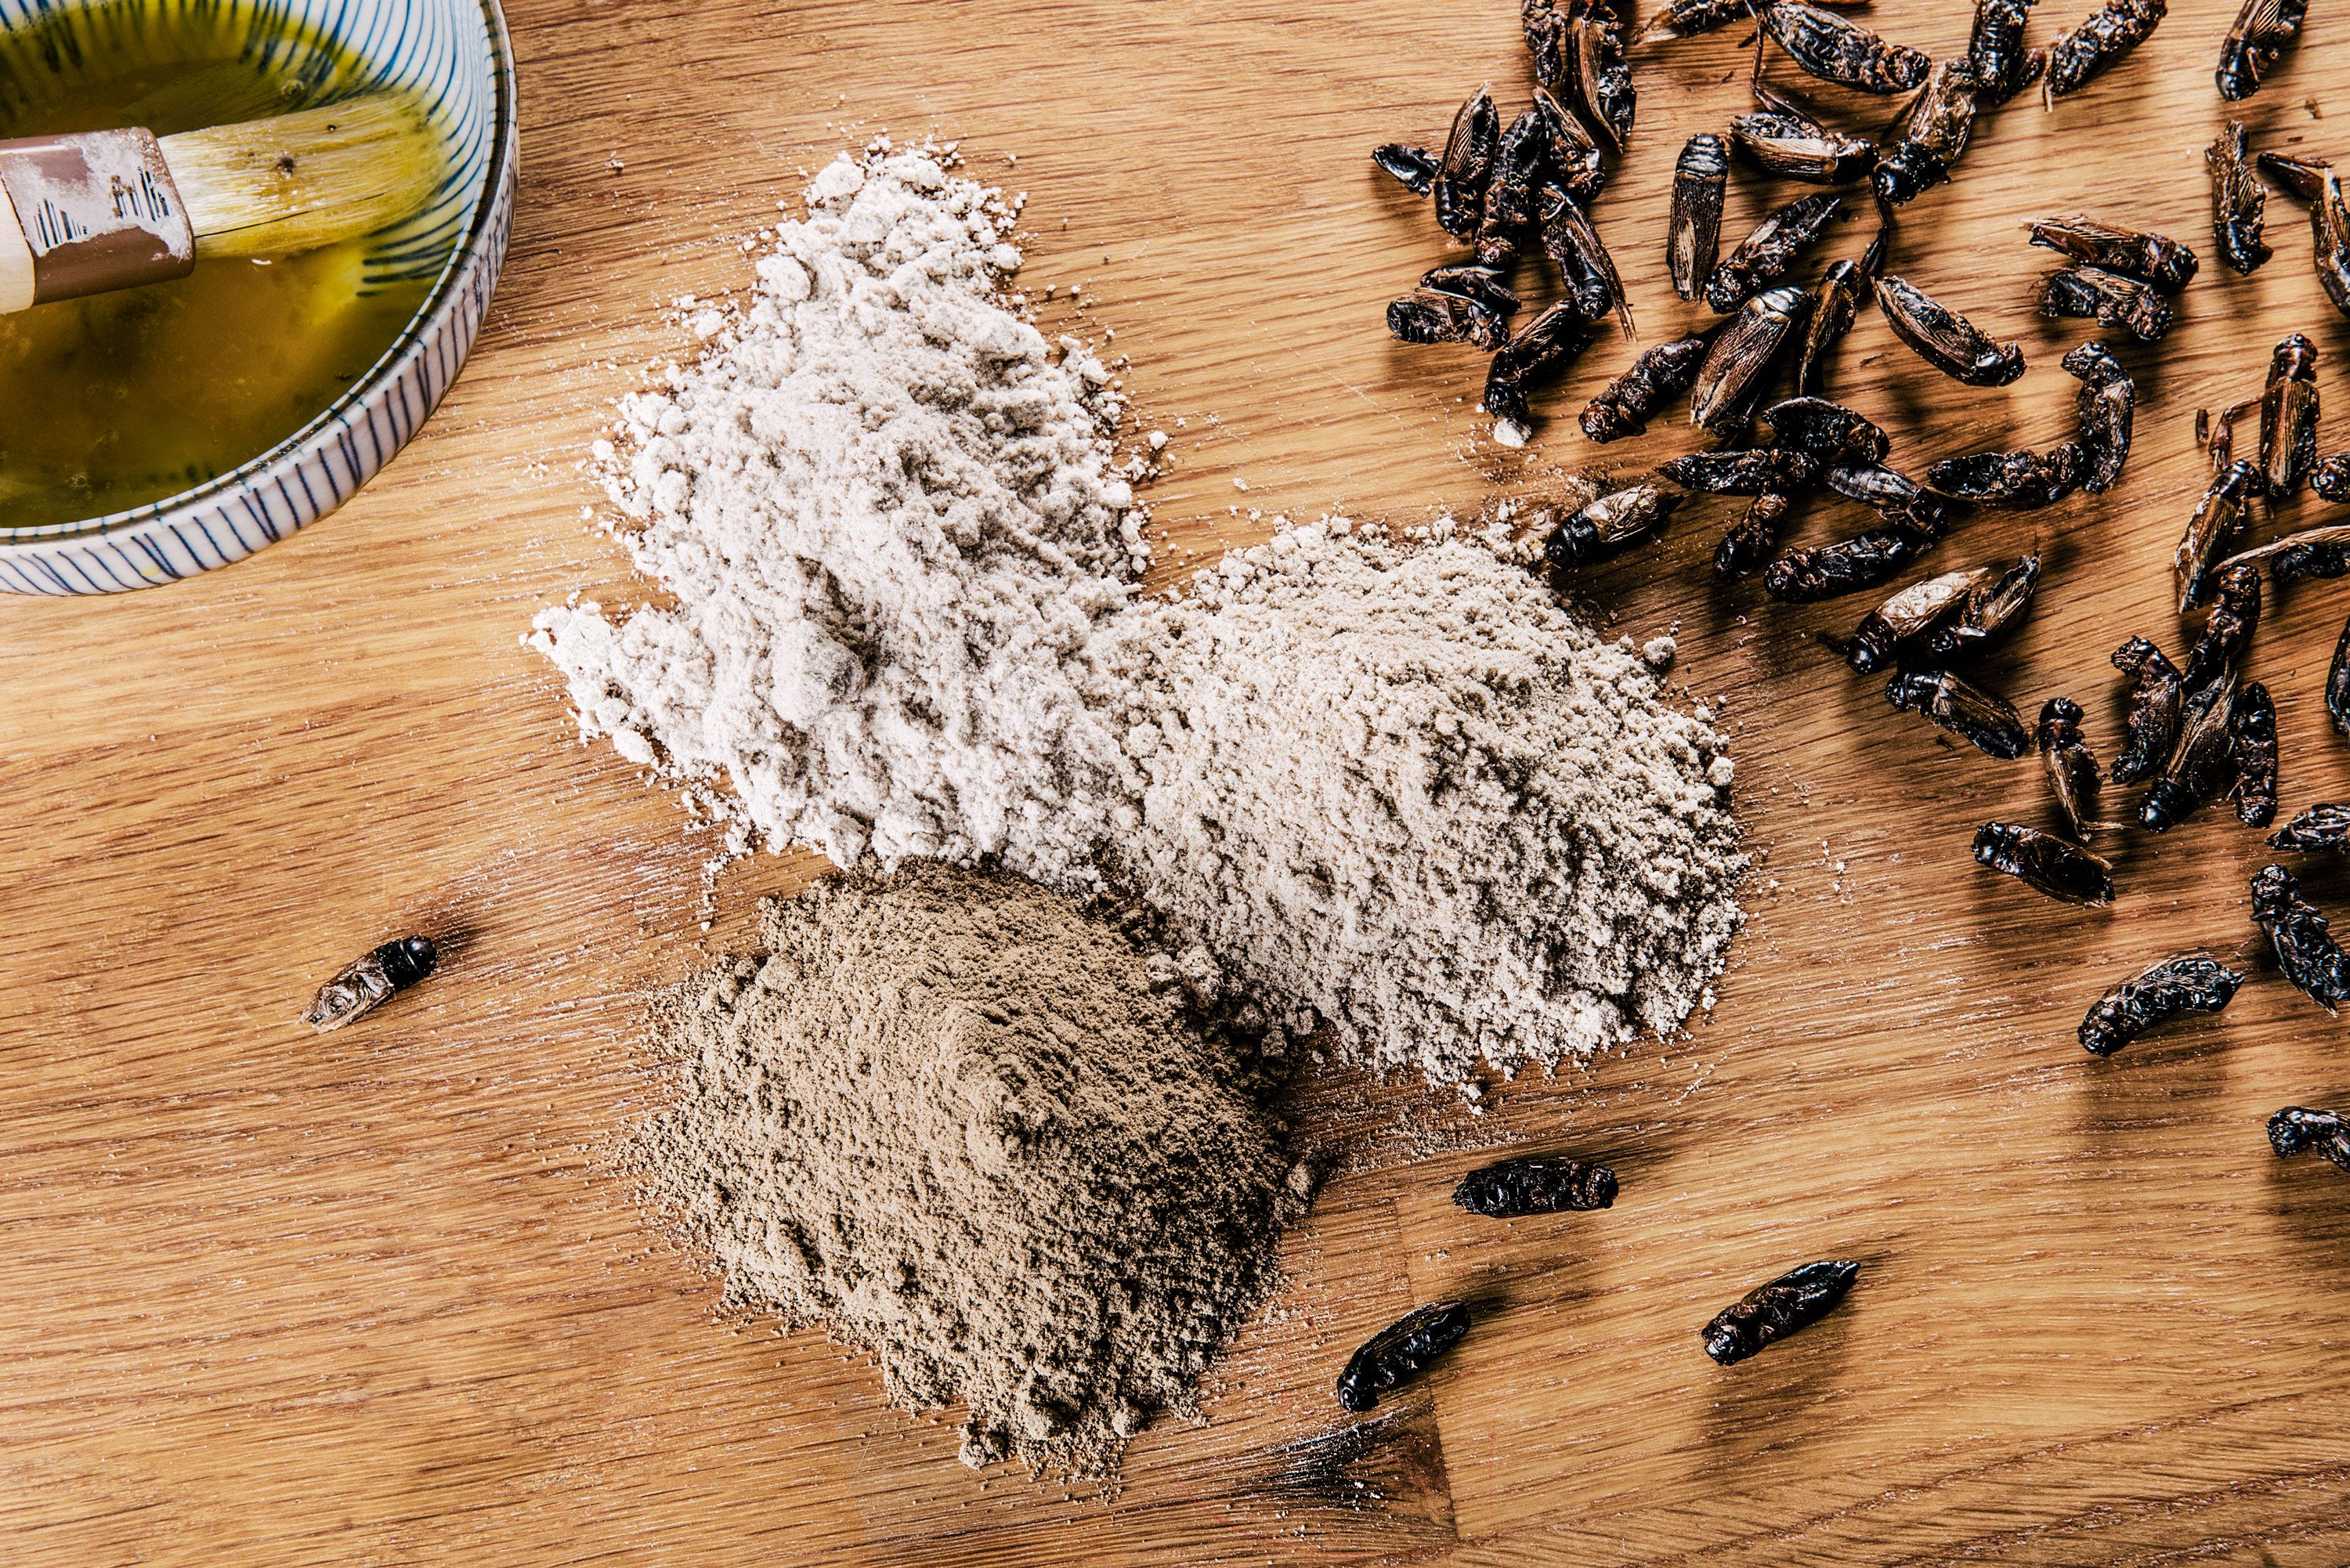 Cooking With Crickets Will Save the World. Here's How To Do It.